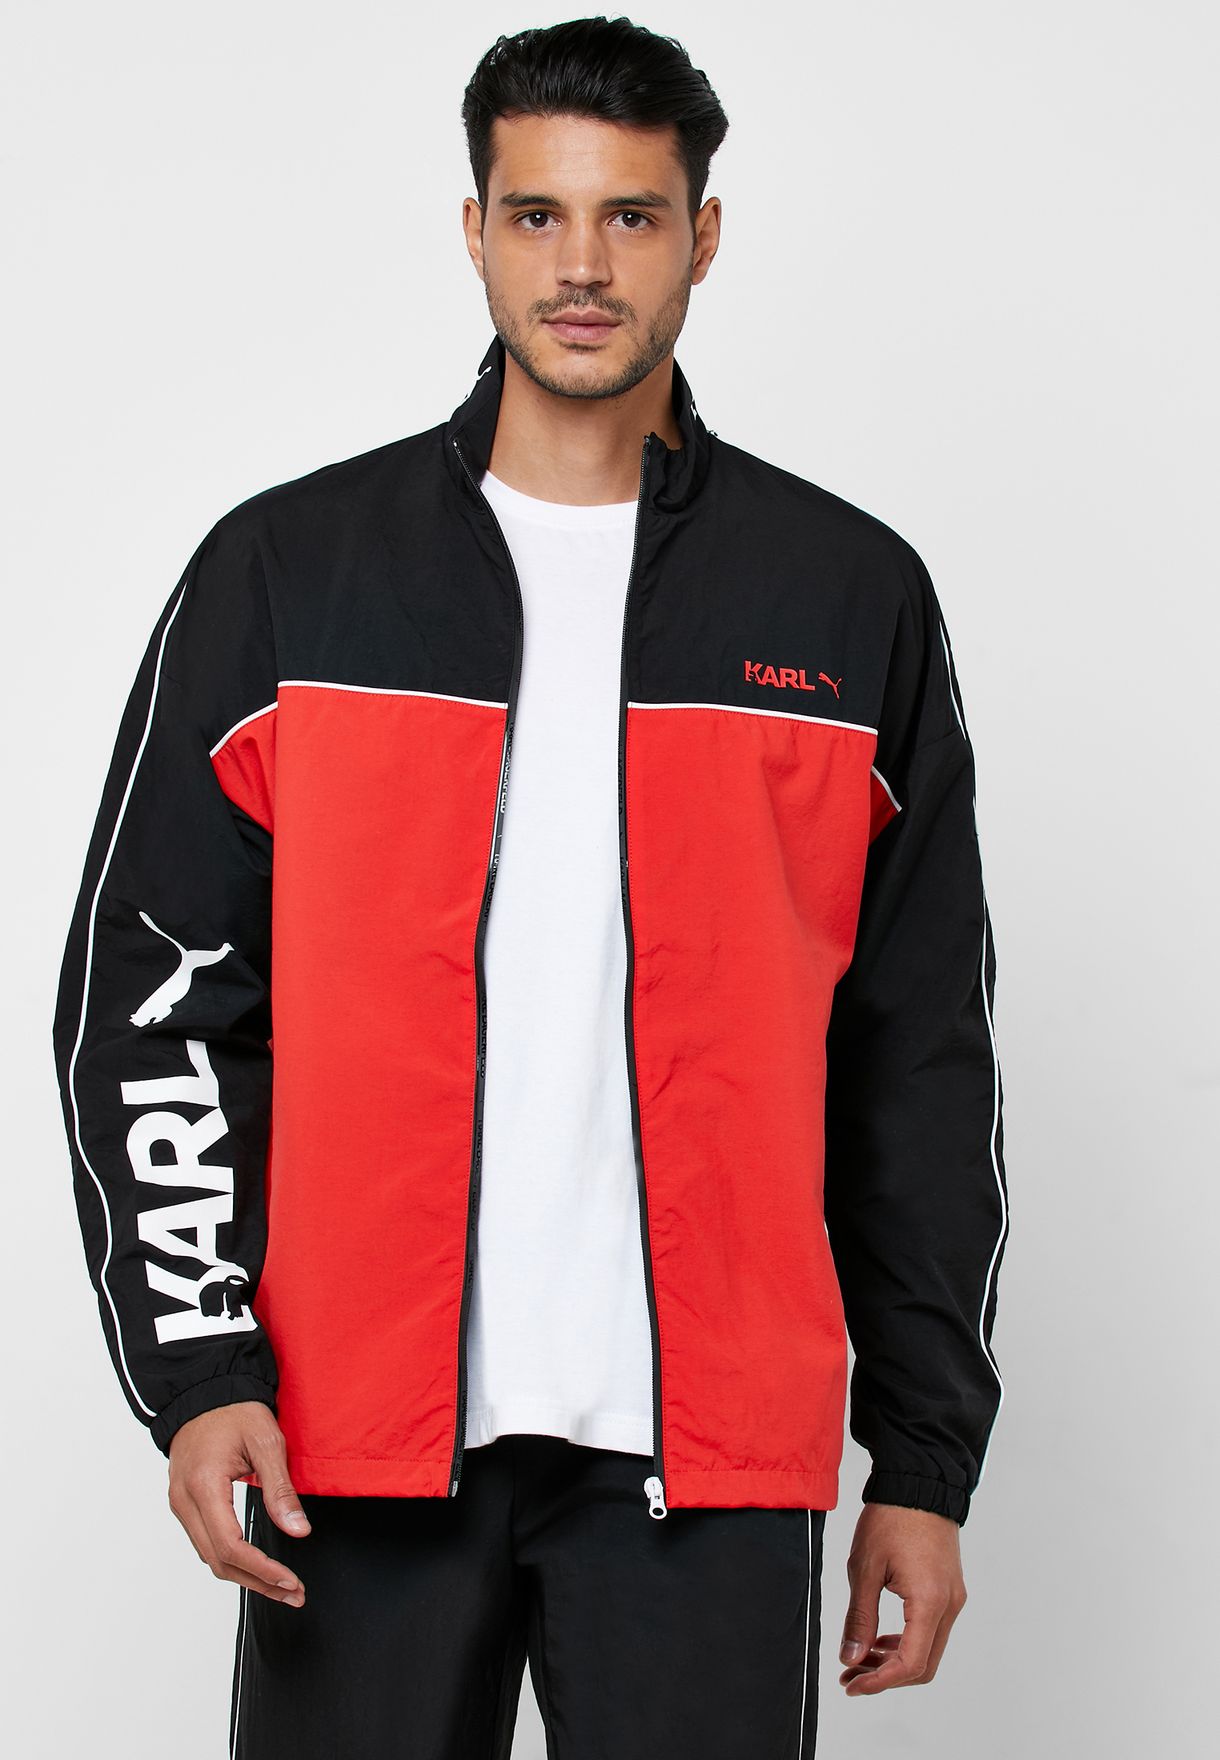 puma black and red track jacket